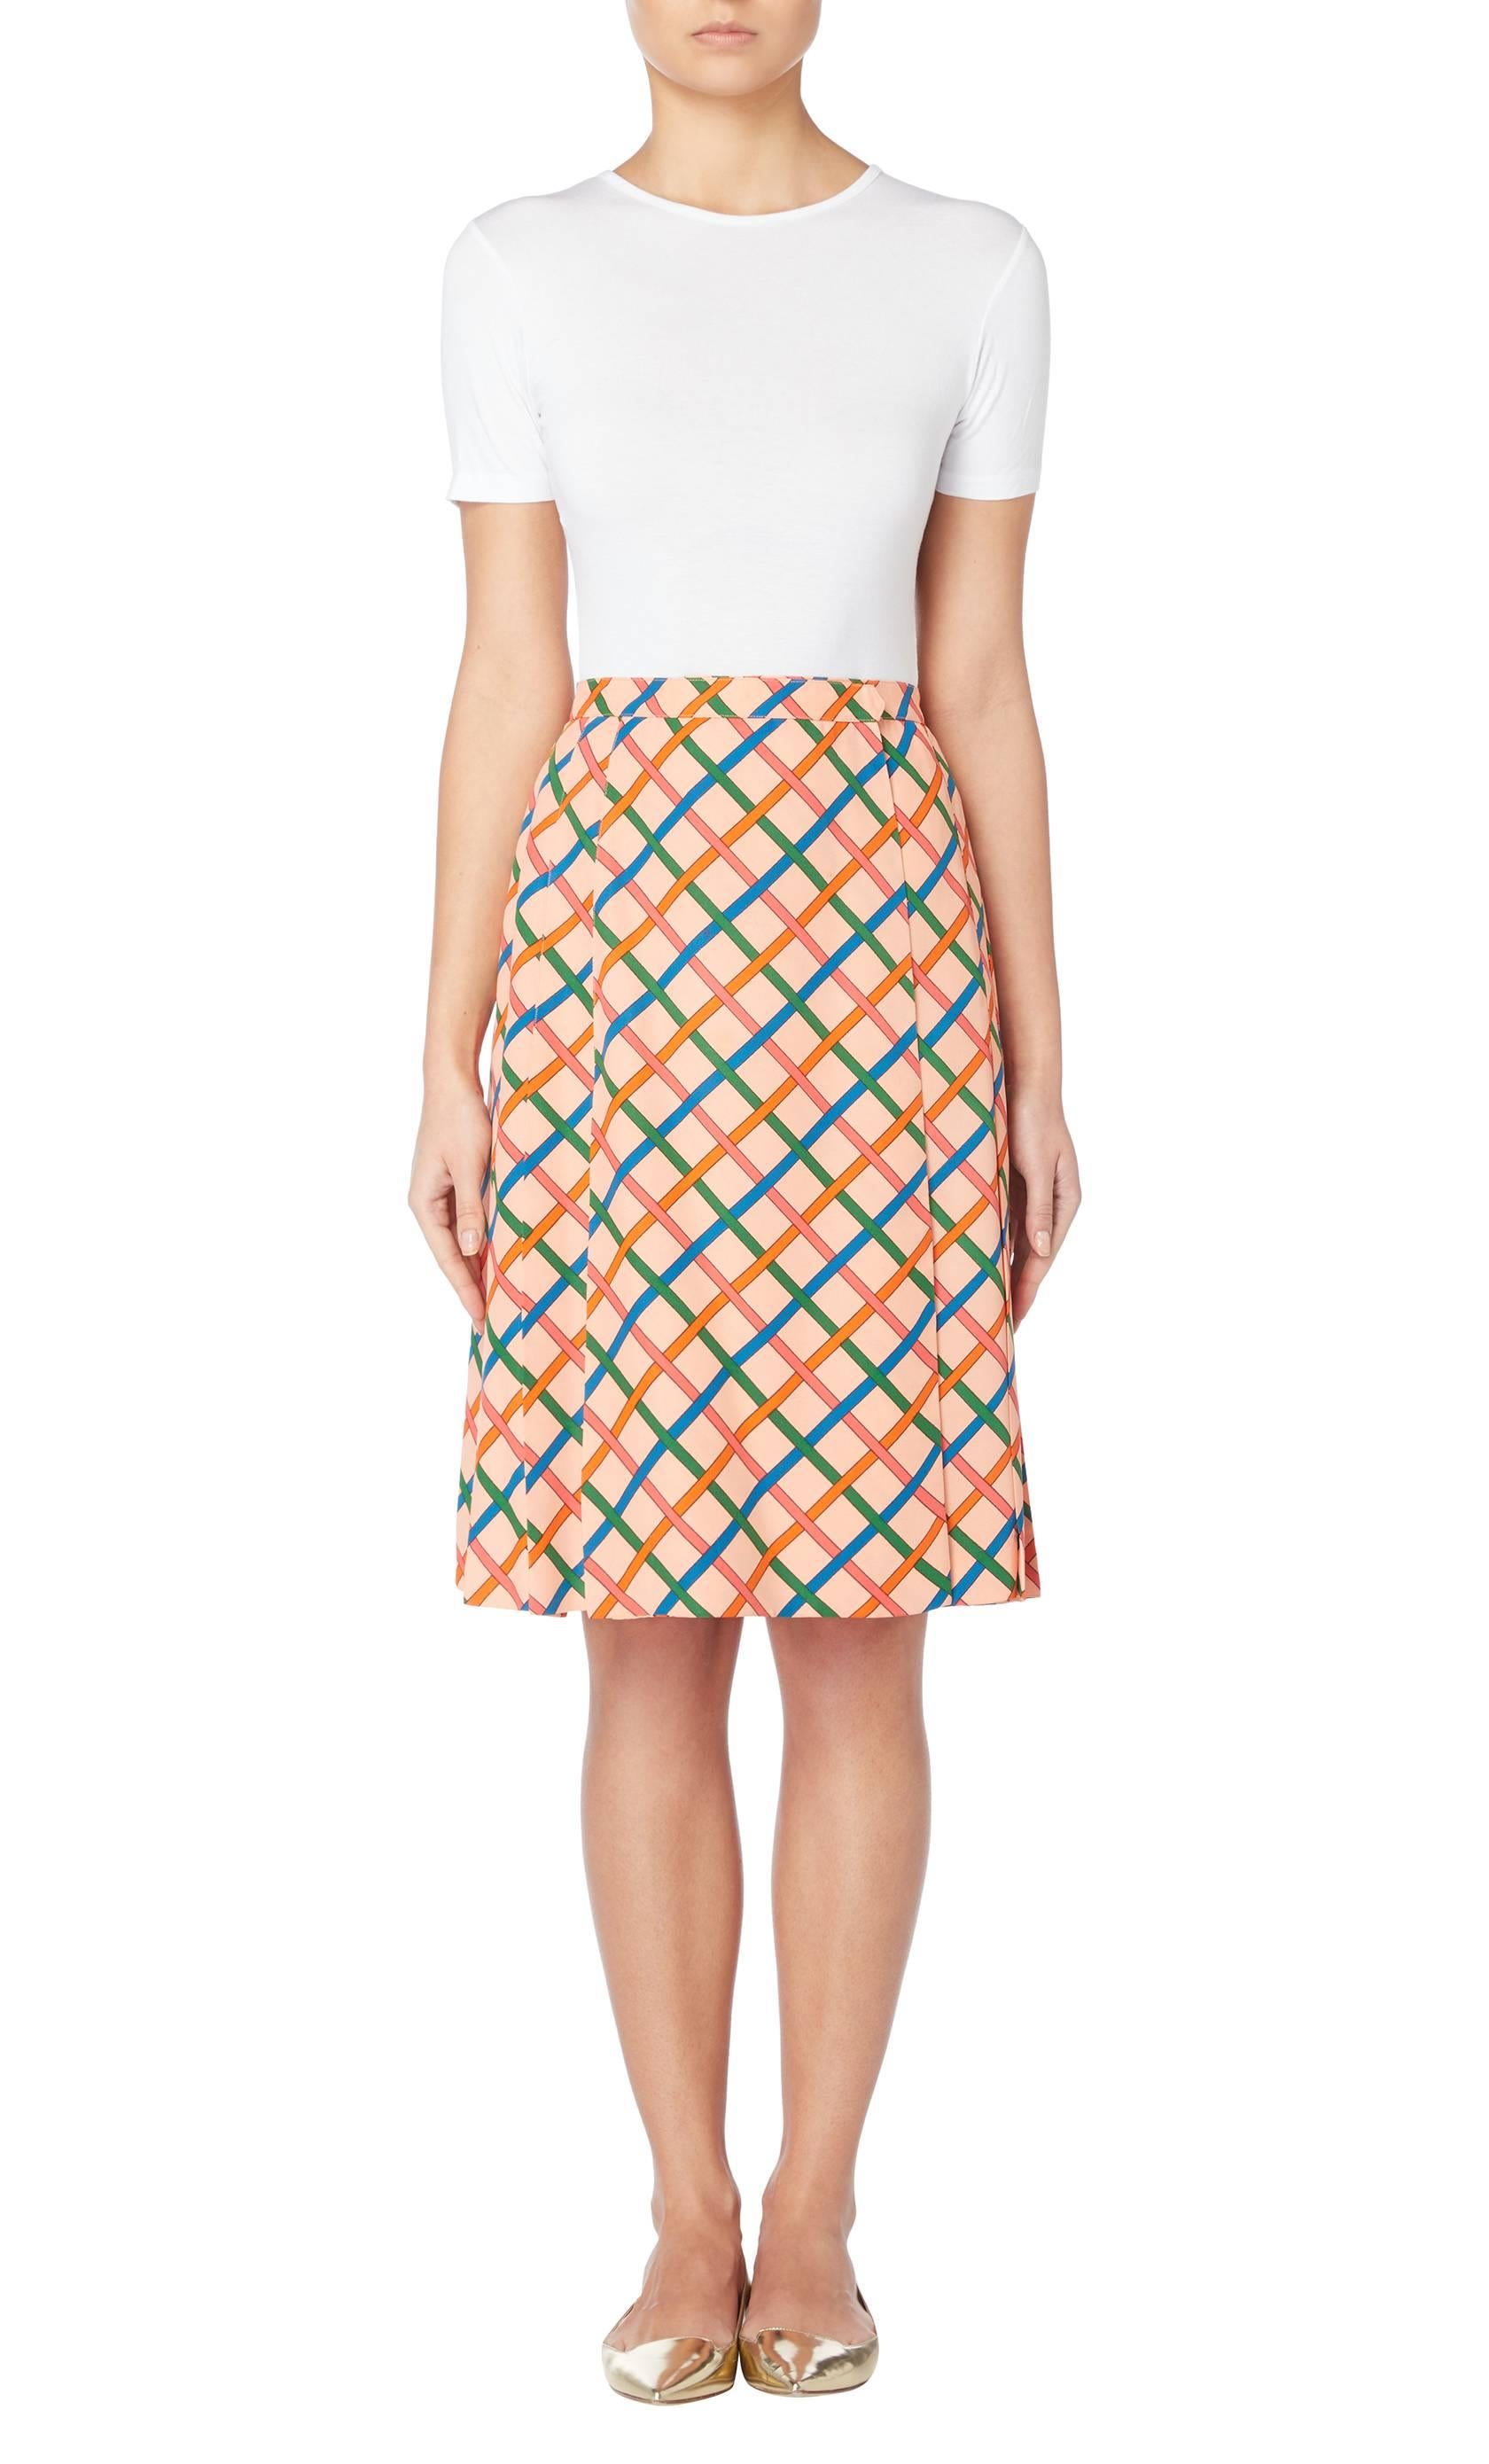 Constructed in pale pink knife pleated silk, this Yves Saint Laurent wrap skirt features a bold print in shades of blue, green and orange.

Constructed in pale pink silk with a blue, green and orange print
Featuring knife pleats to the back and